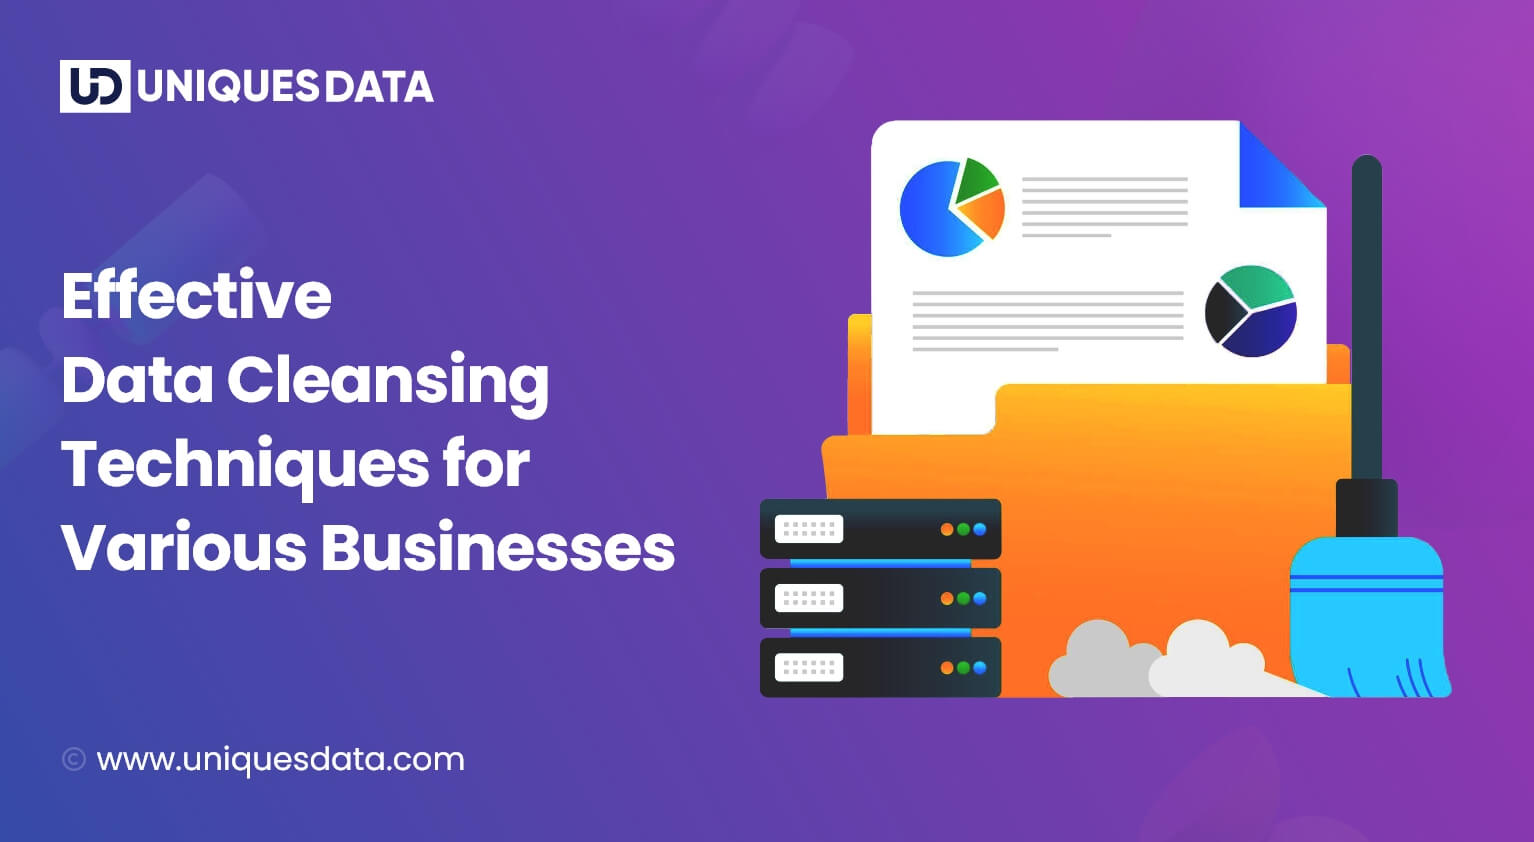 Effective Data Cleansing Techniques for Various Businesses